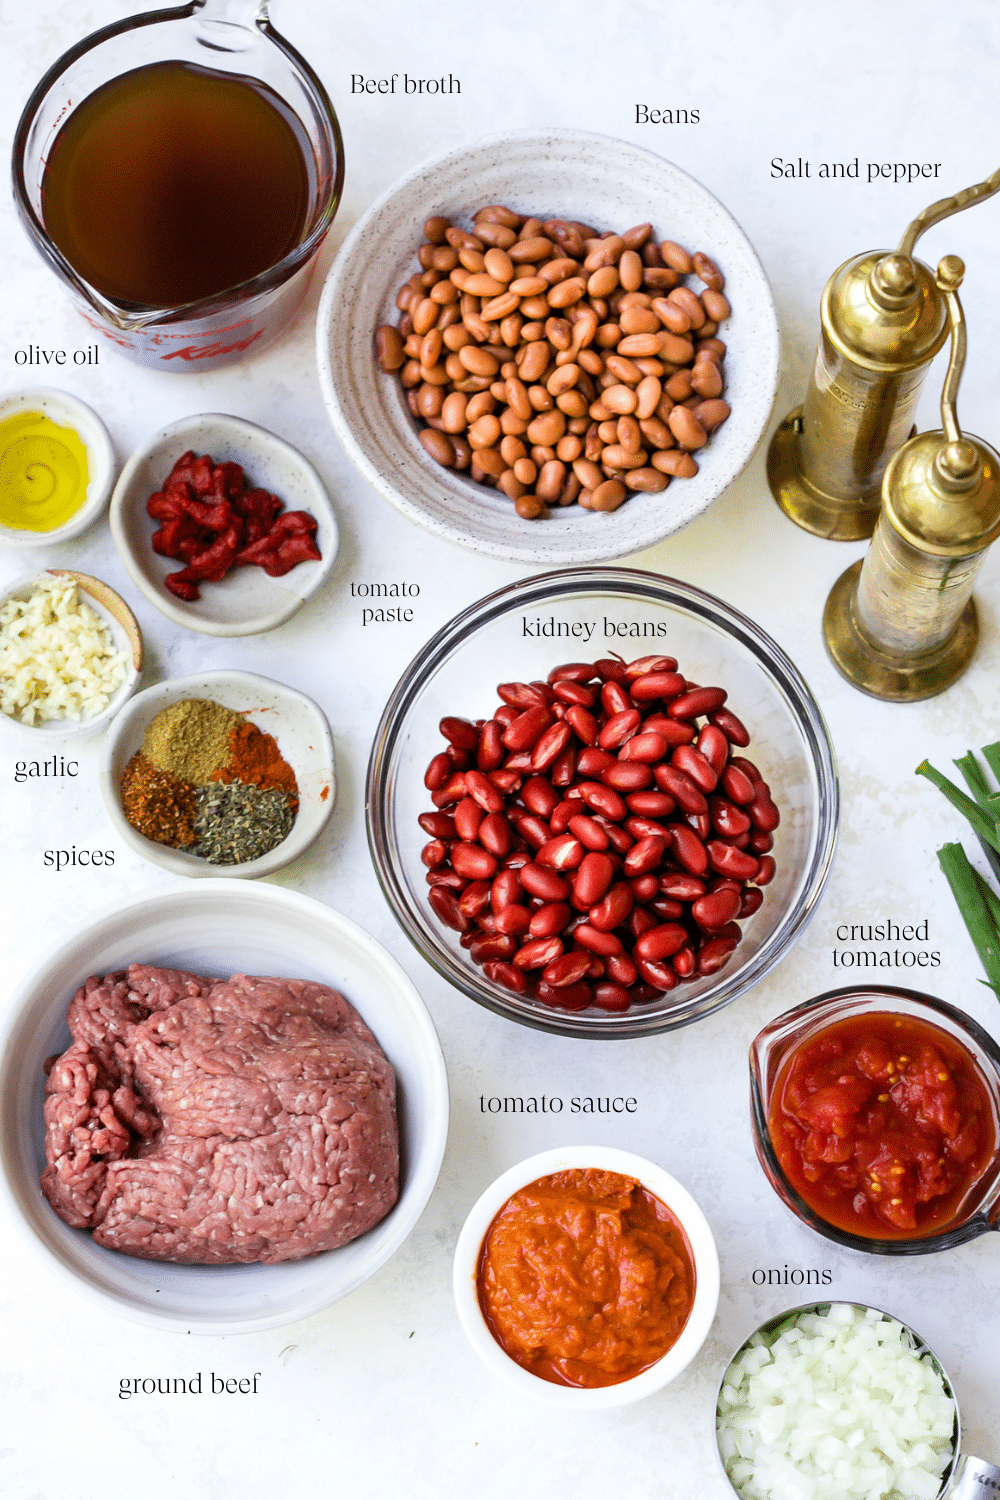 Ingredients laid out on a countertop to make Classic Chili Recipe.